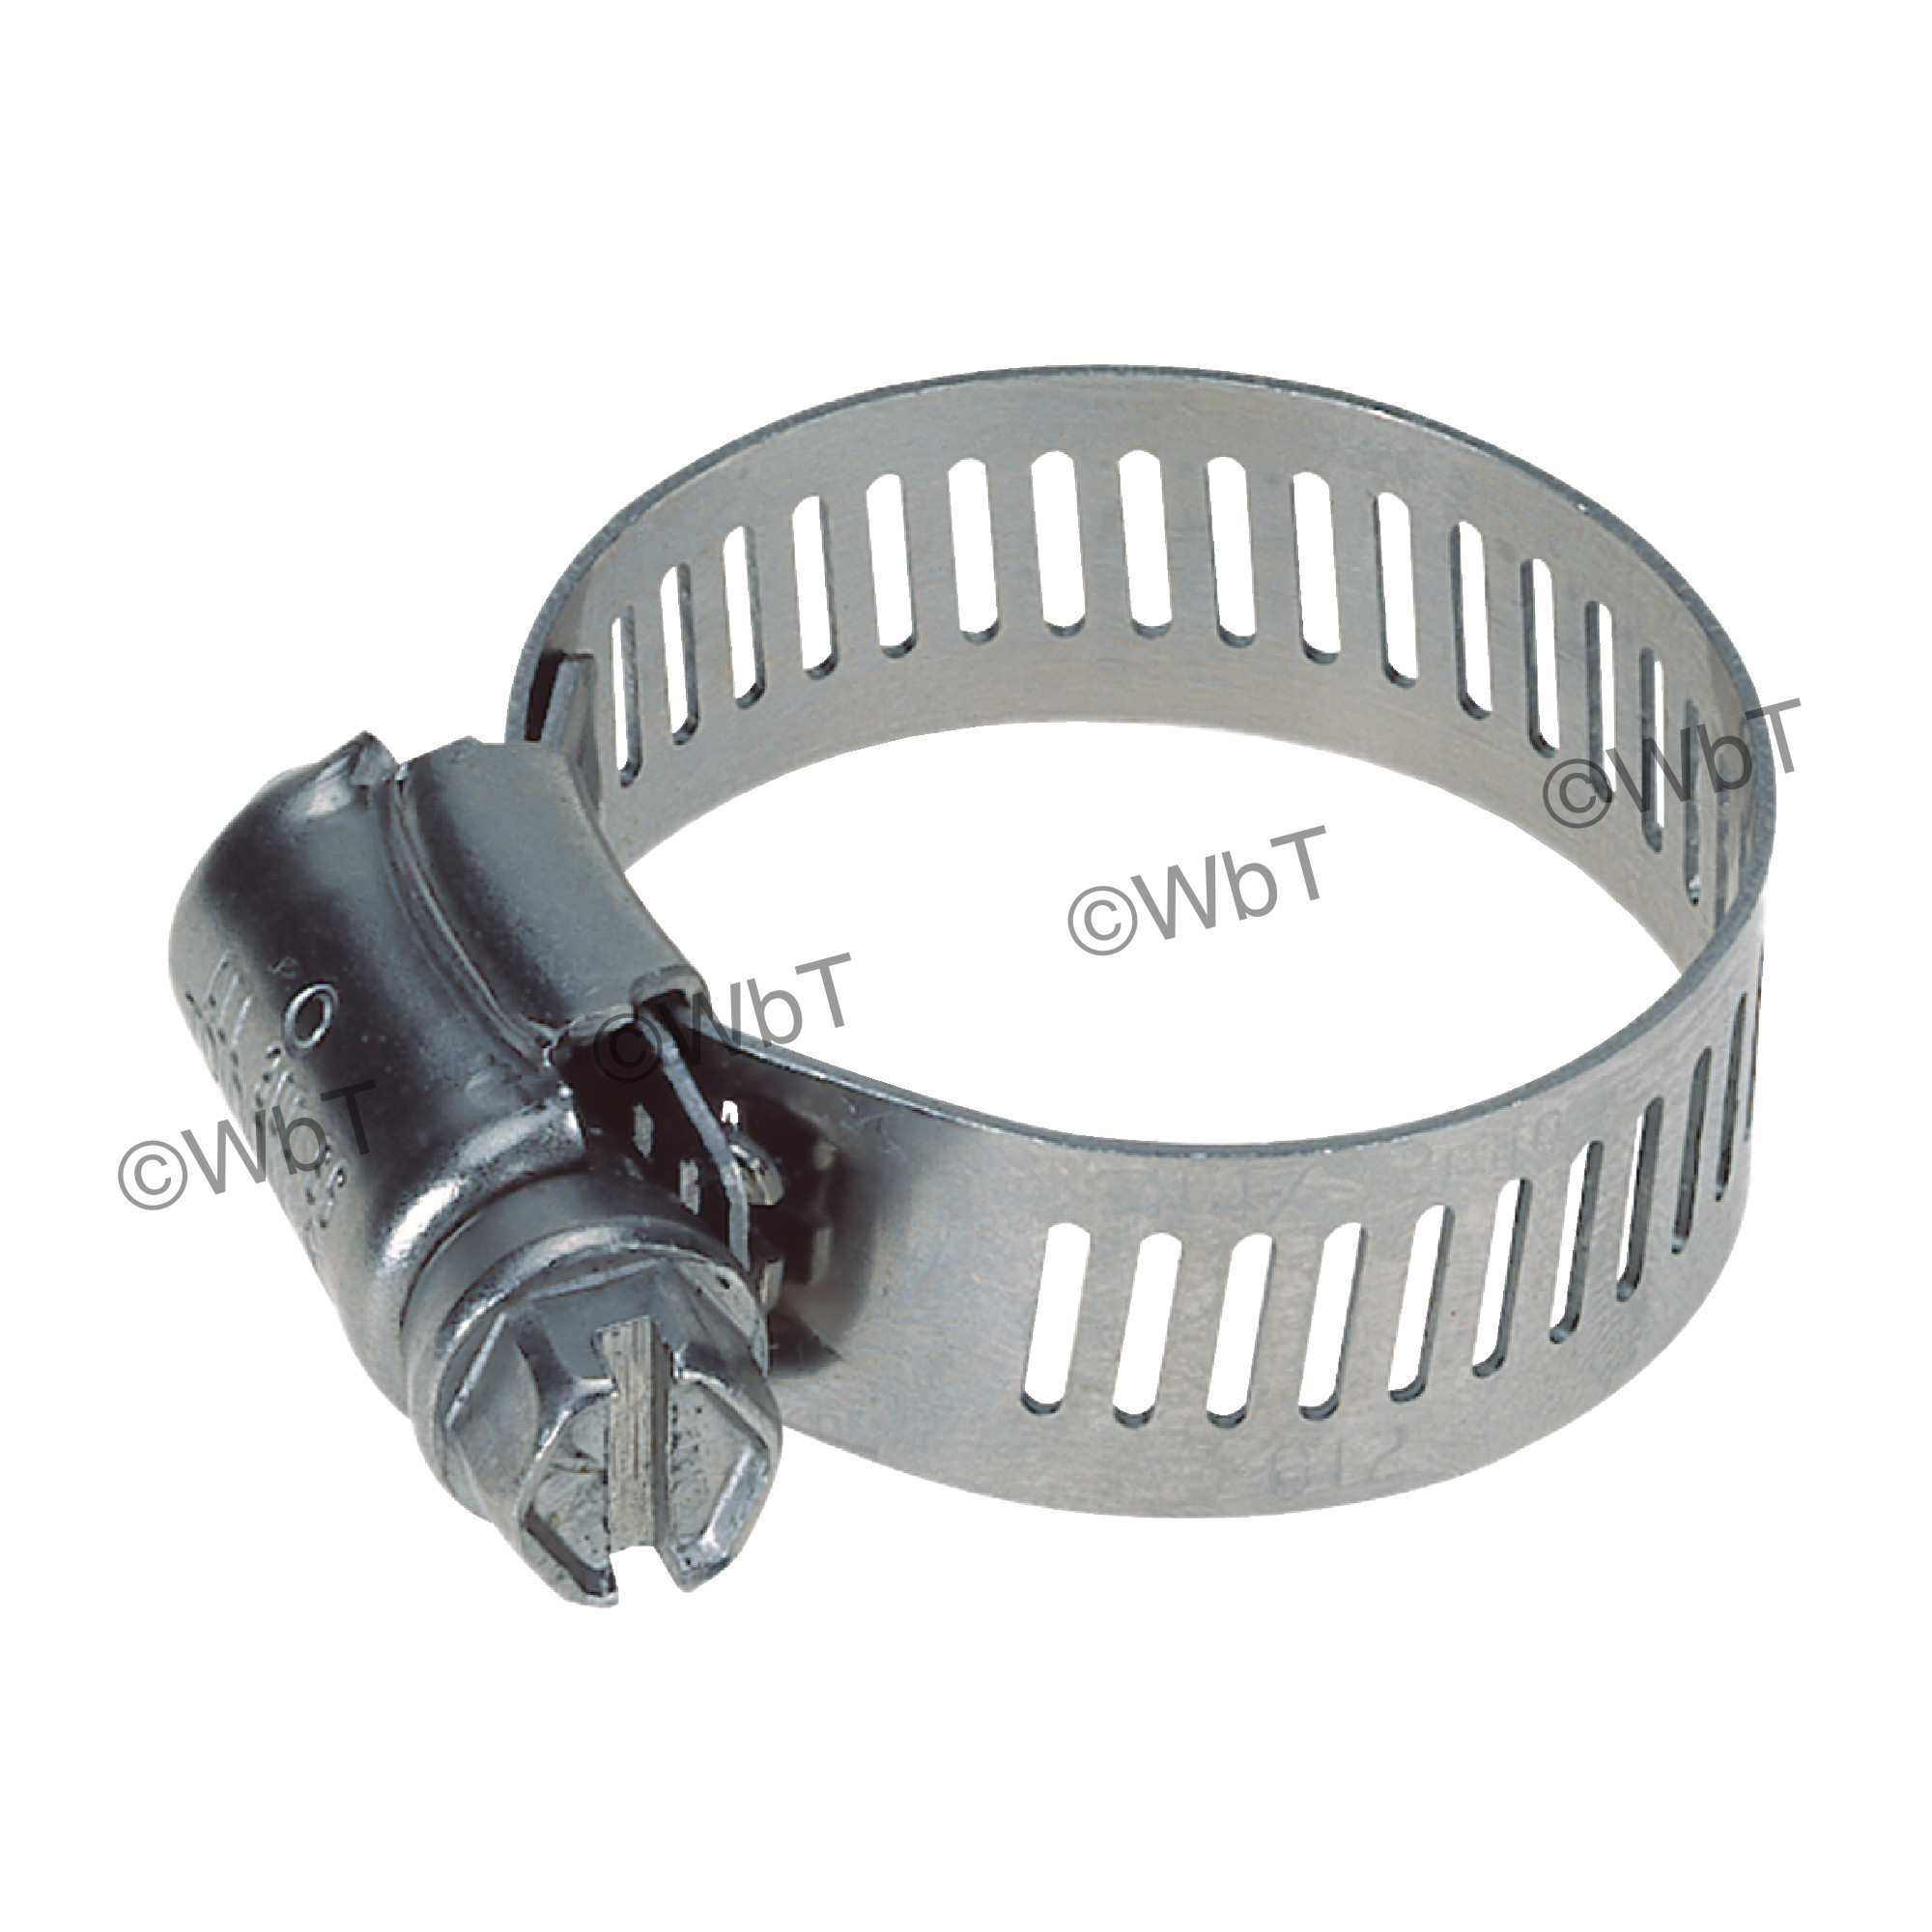 Stainless Steel Worm Drive Hose Clamp